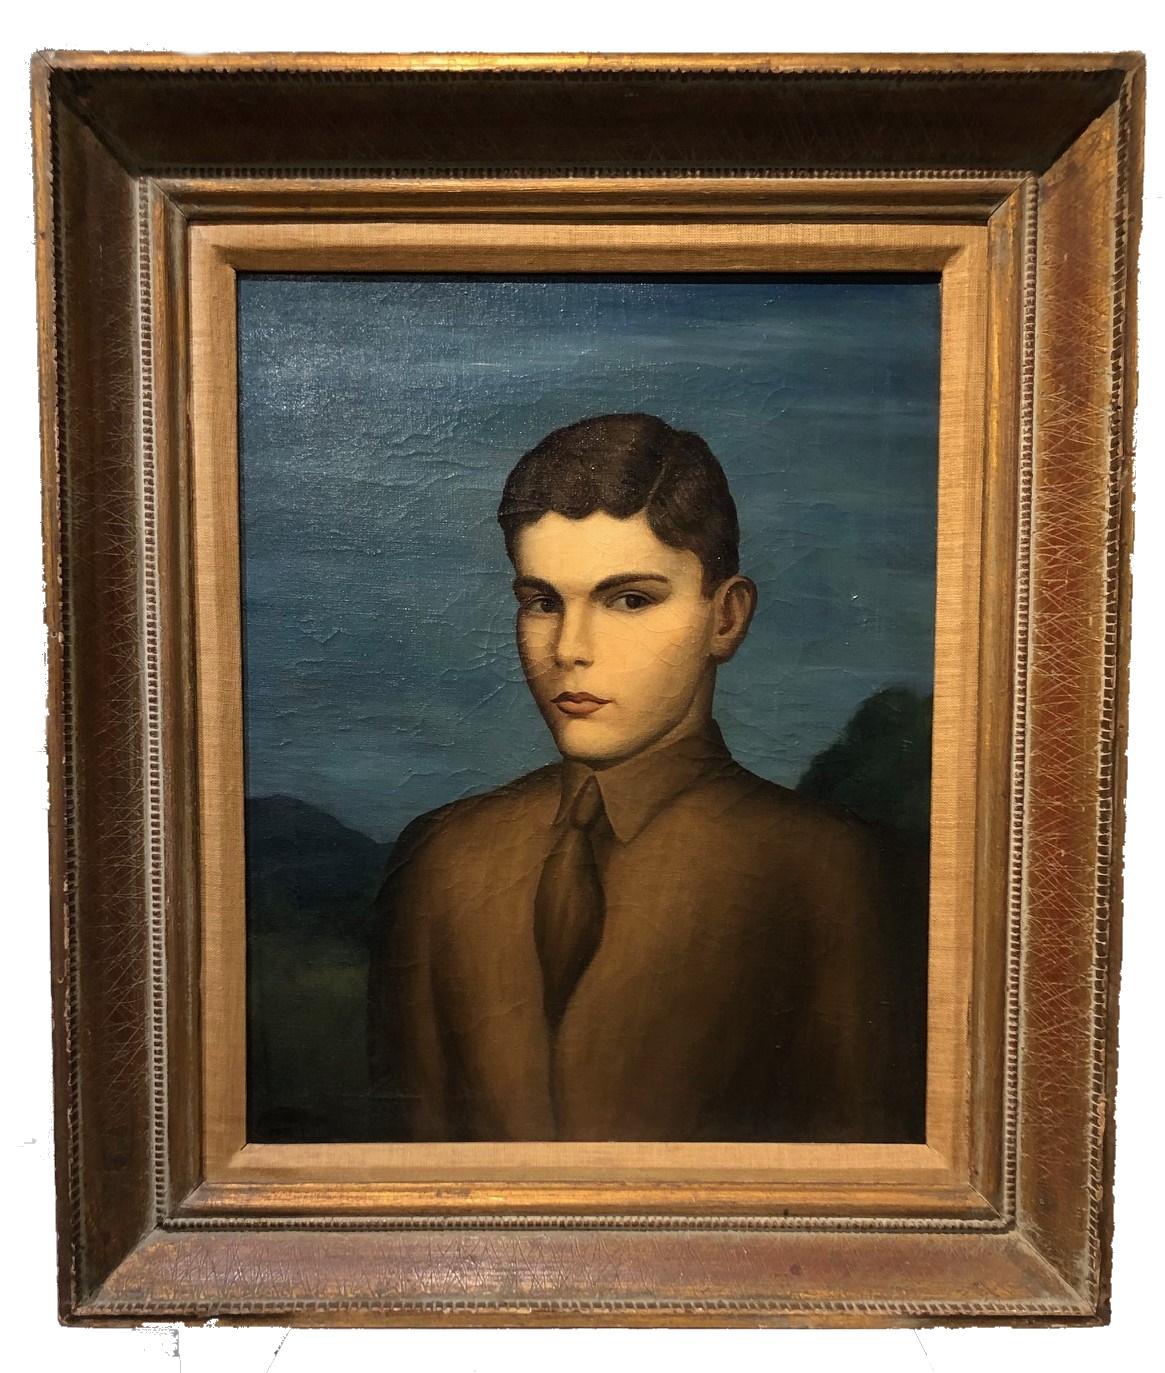 American Art Deco
Modernist Social Realism
Paul Raphael Meltsner 
Portrait of a Youth
Oil on canvas
Circa 1940

DIMENSIONS
CANVAS:  26 x 20 inches
FRAMED: 30 .5 x 24.5 inches

DETAILS
Signed ‘Paul Meltsner’ lower left.
Vintage wood frame with linen